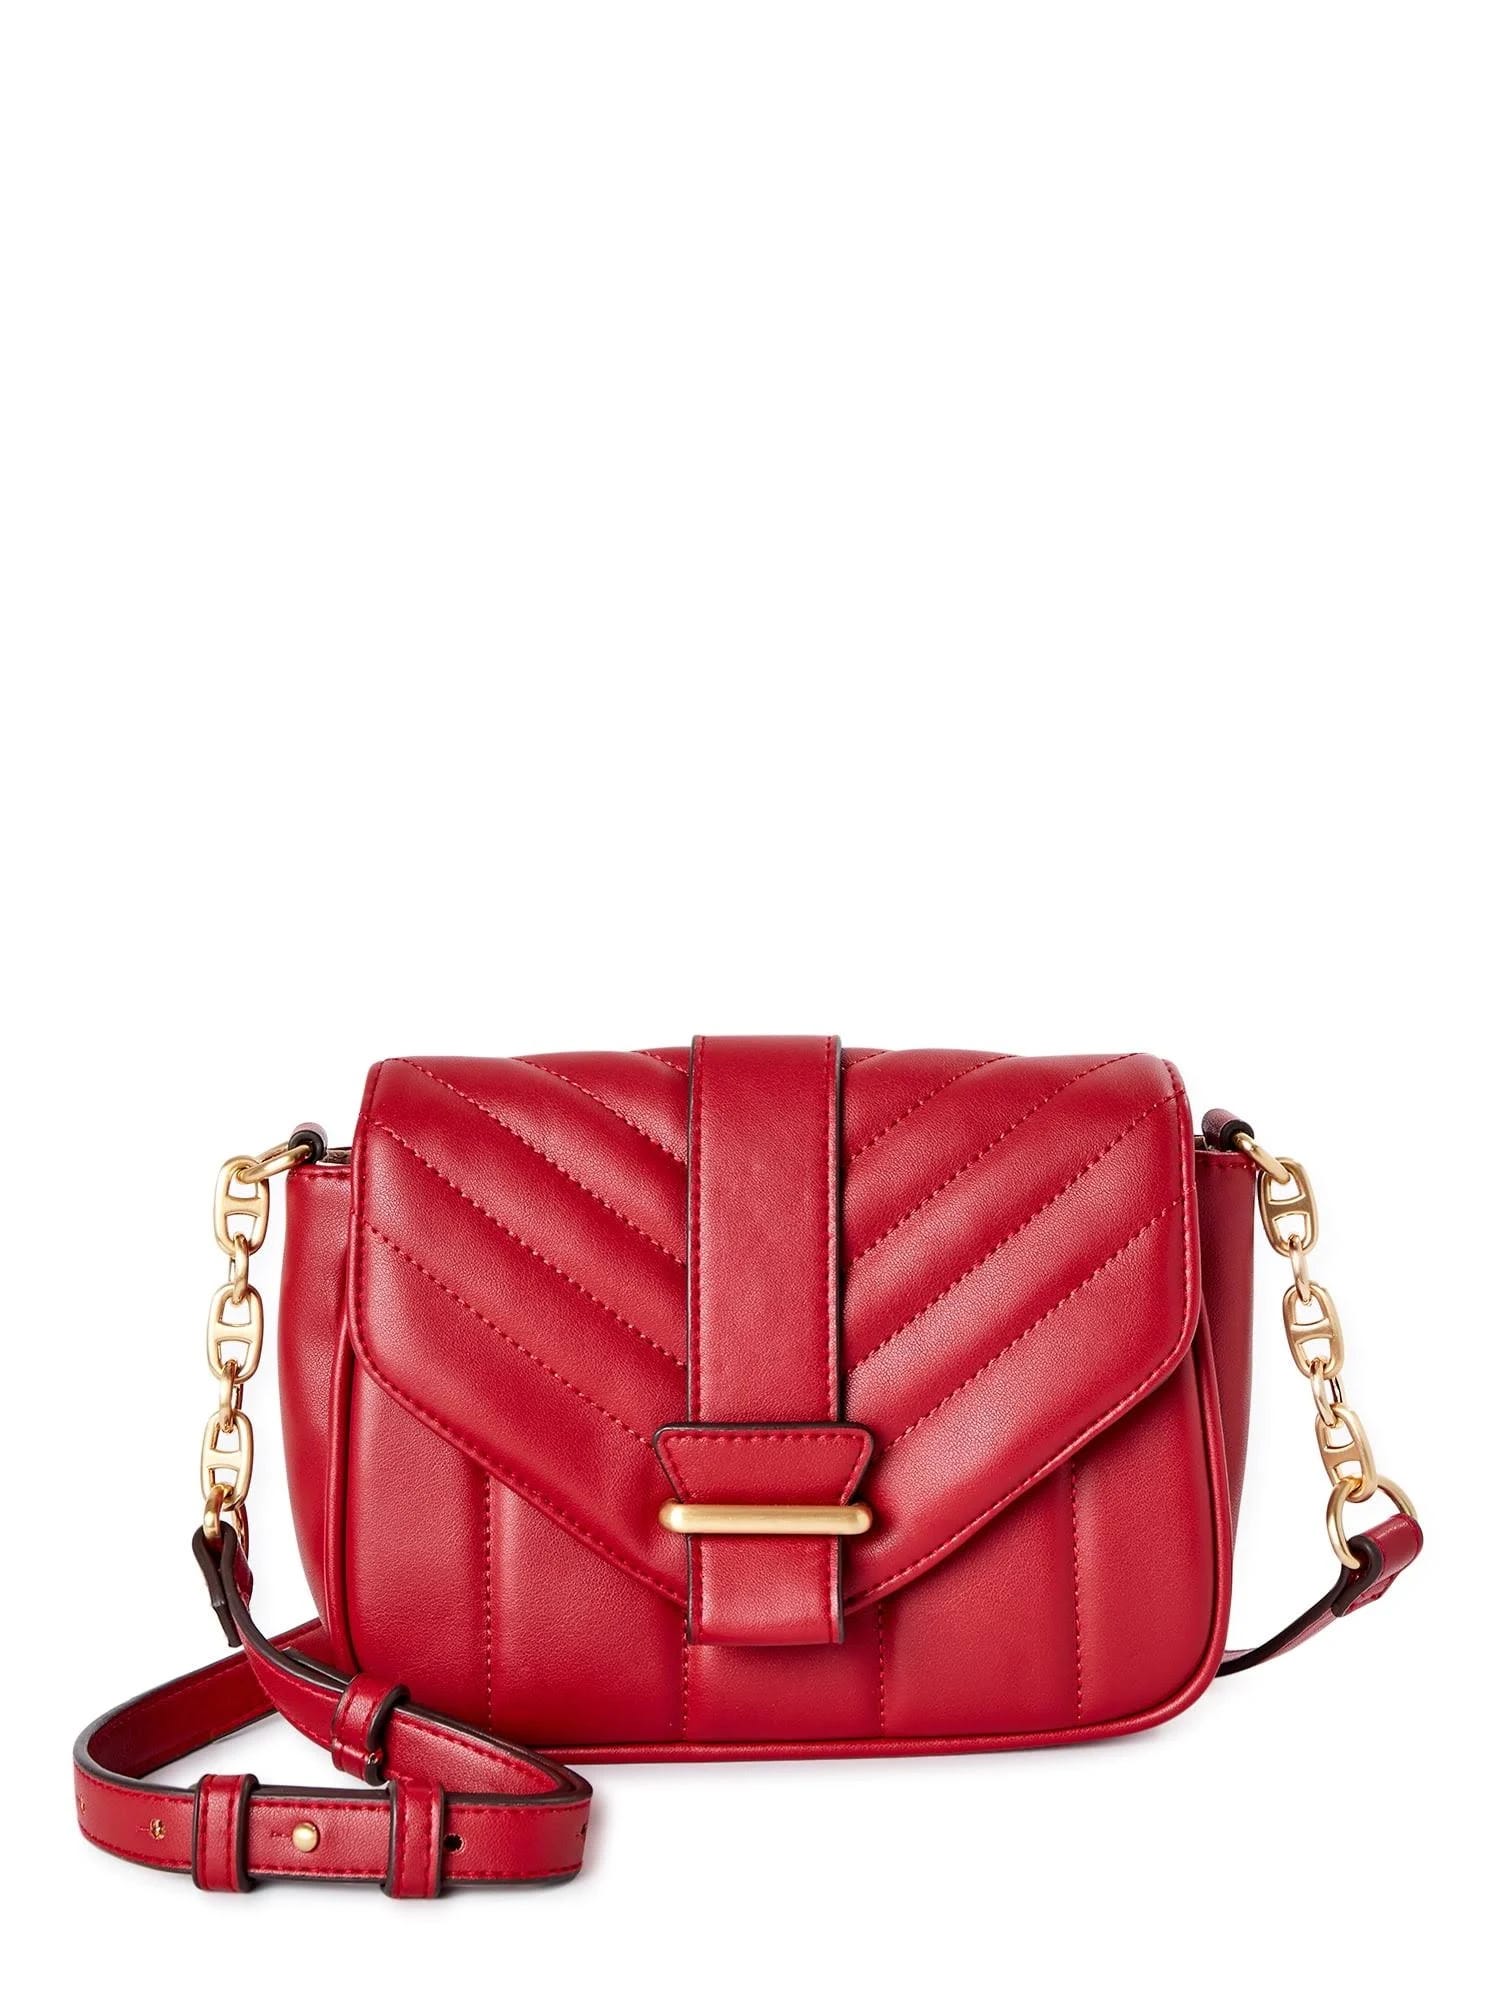 Fashionable Quilted Shoulder Bag for Everyday Use - Time and Tru Women's Camber Crossbody | Image